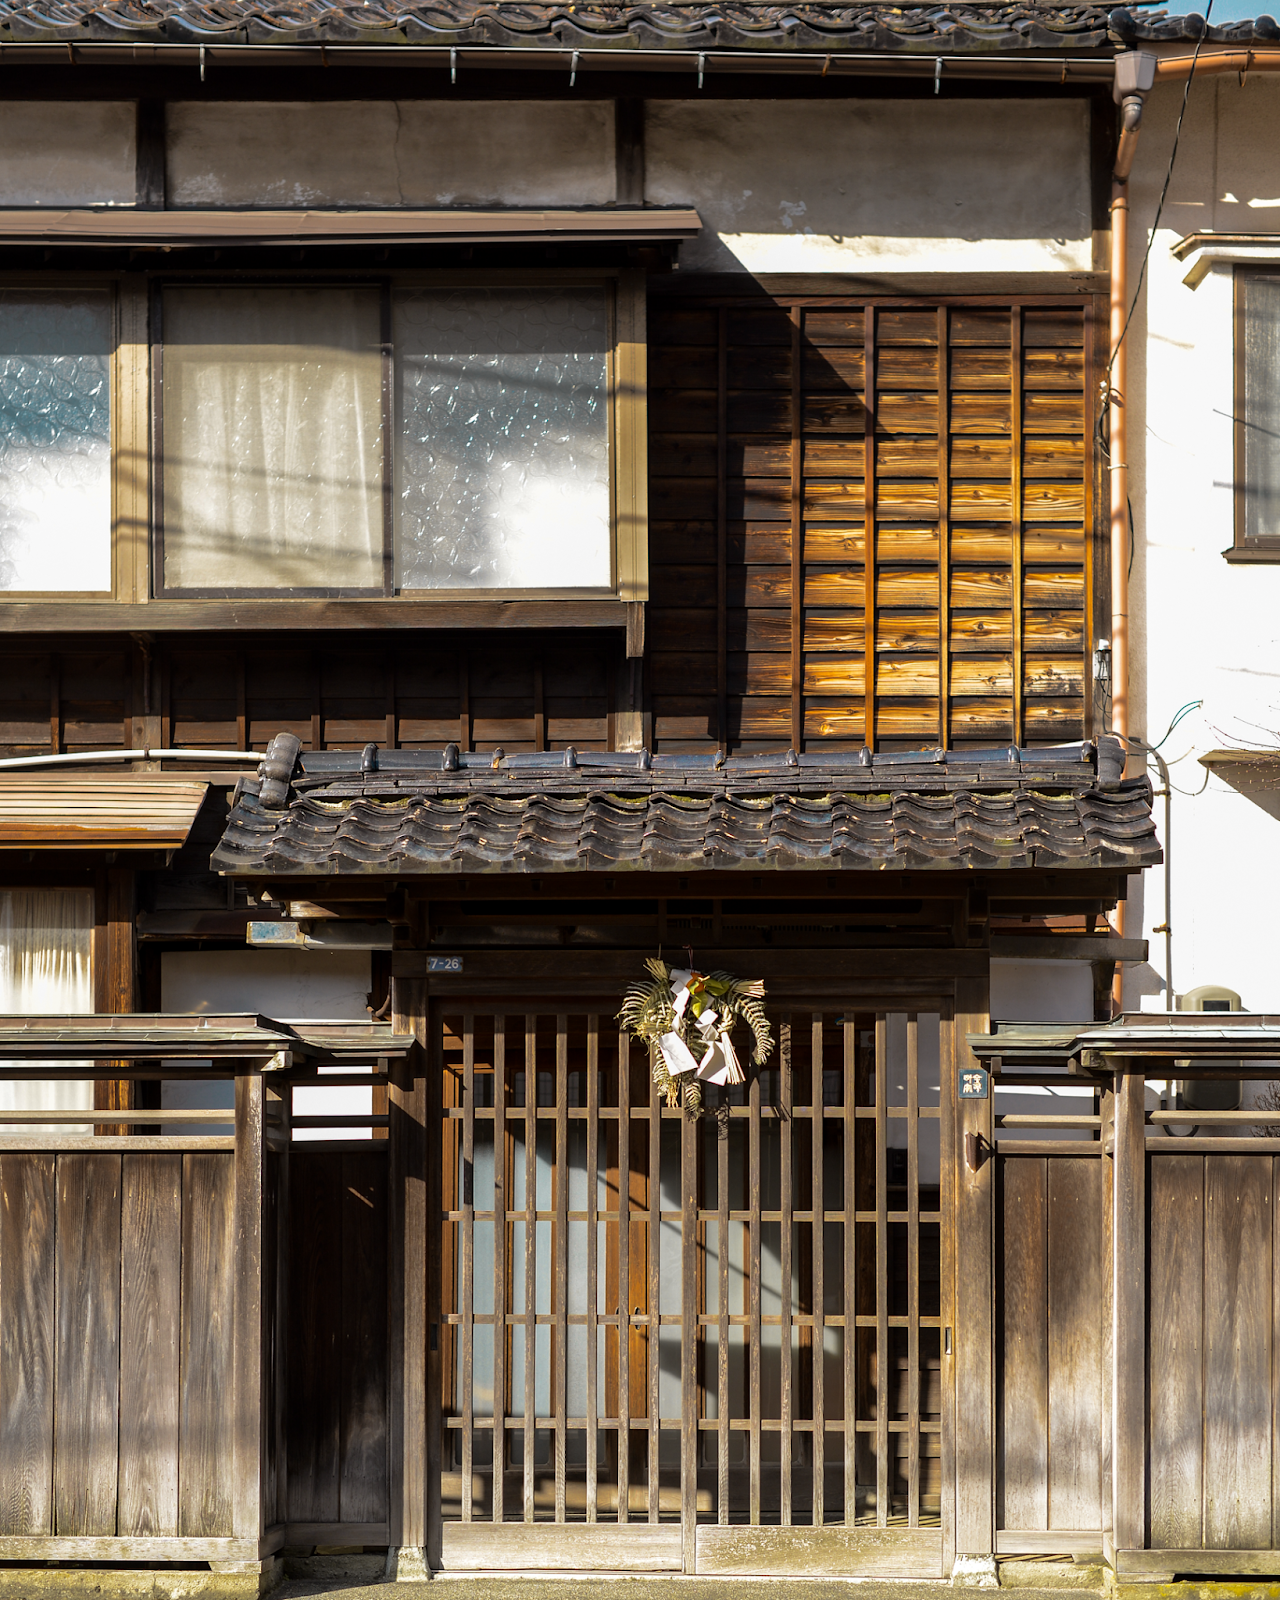 Kanazawa trip from Tokyo, must-visit cities in Japan, Nishi Chaya District, photogenic and charming towns in Japan - FOREVERVANNY